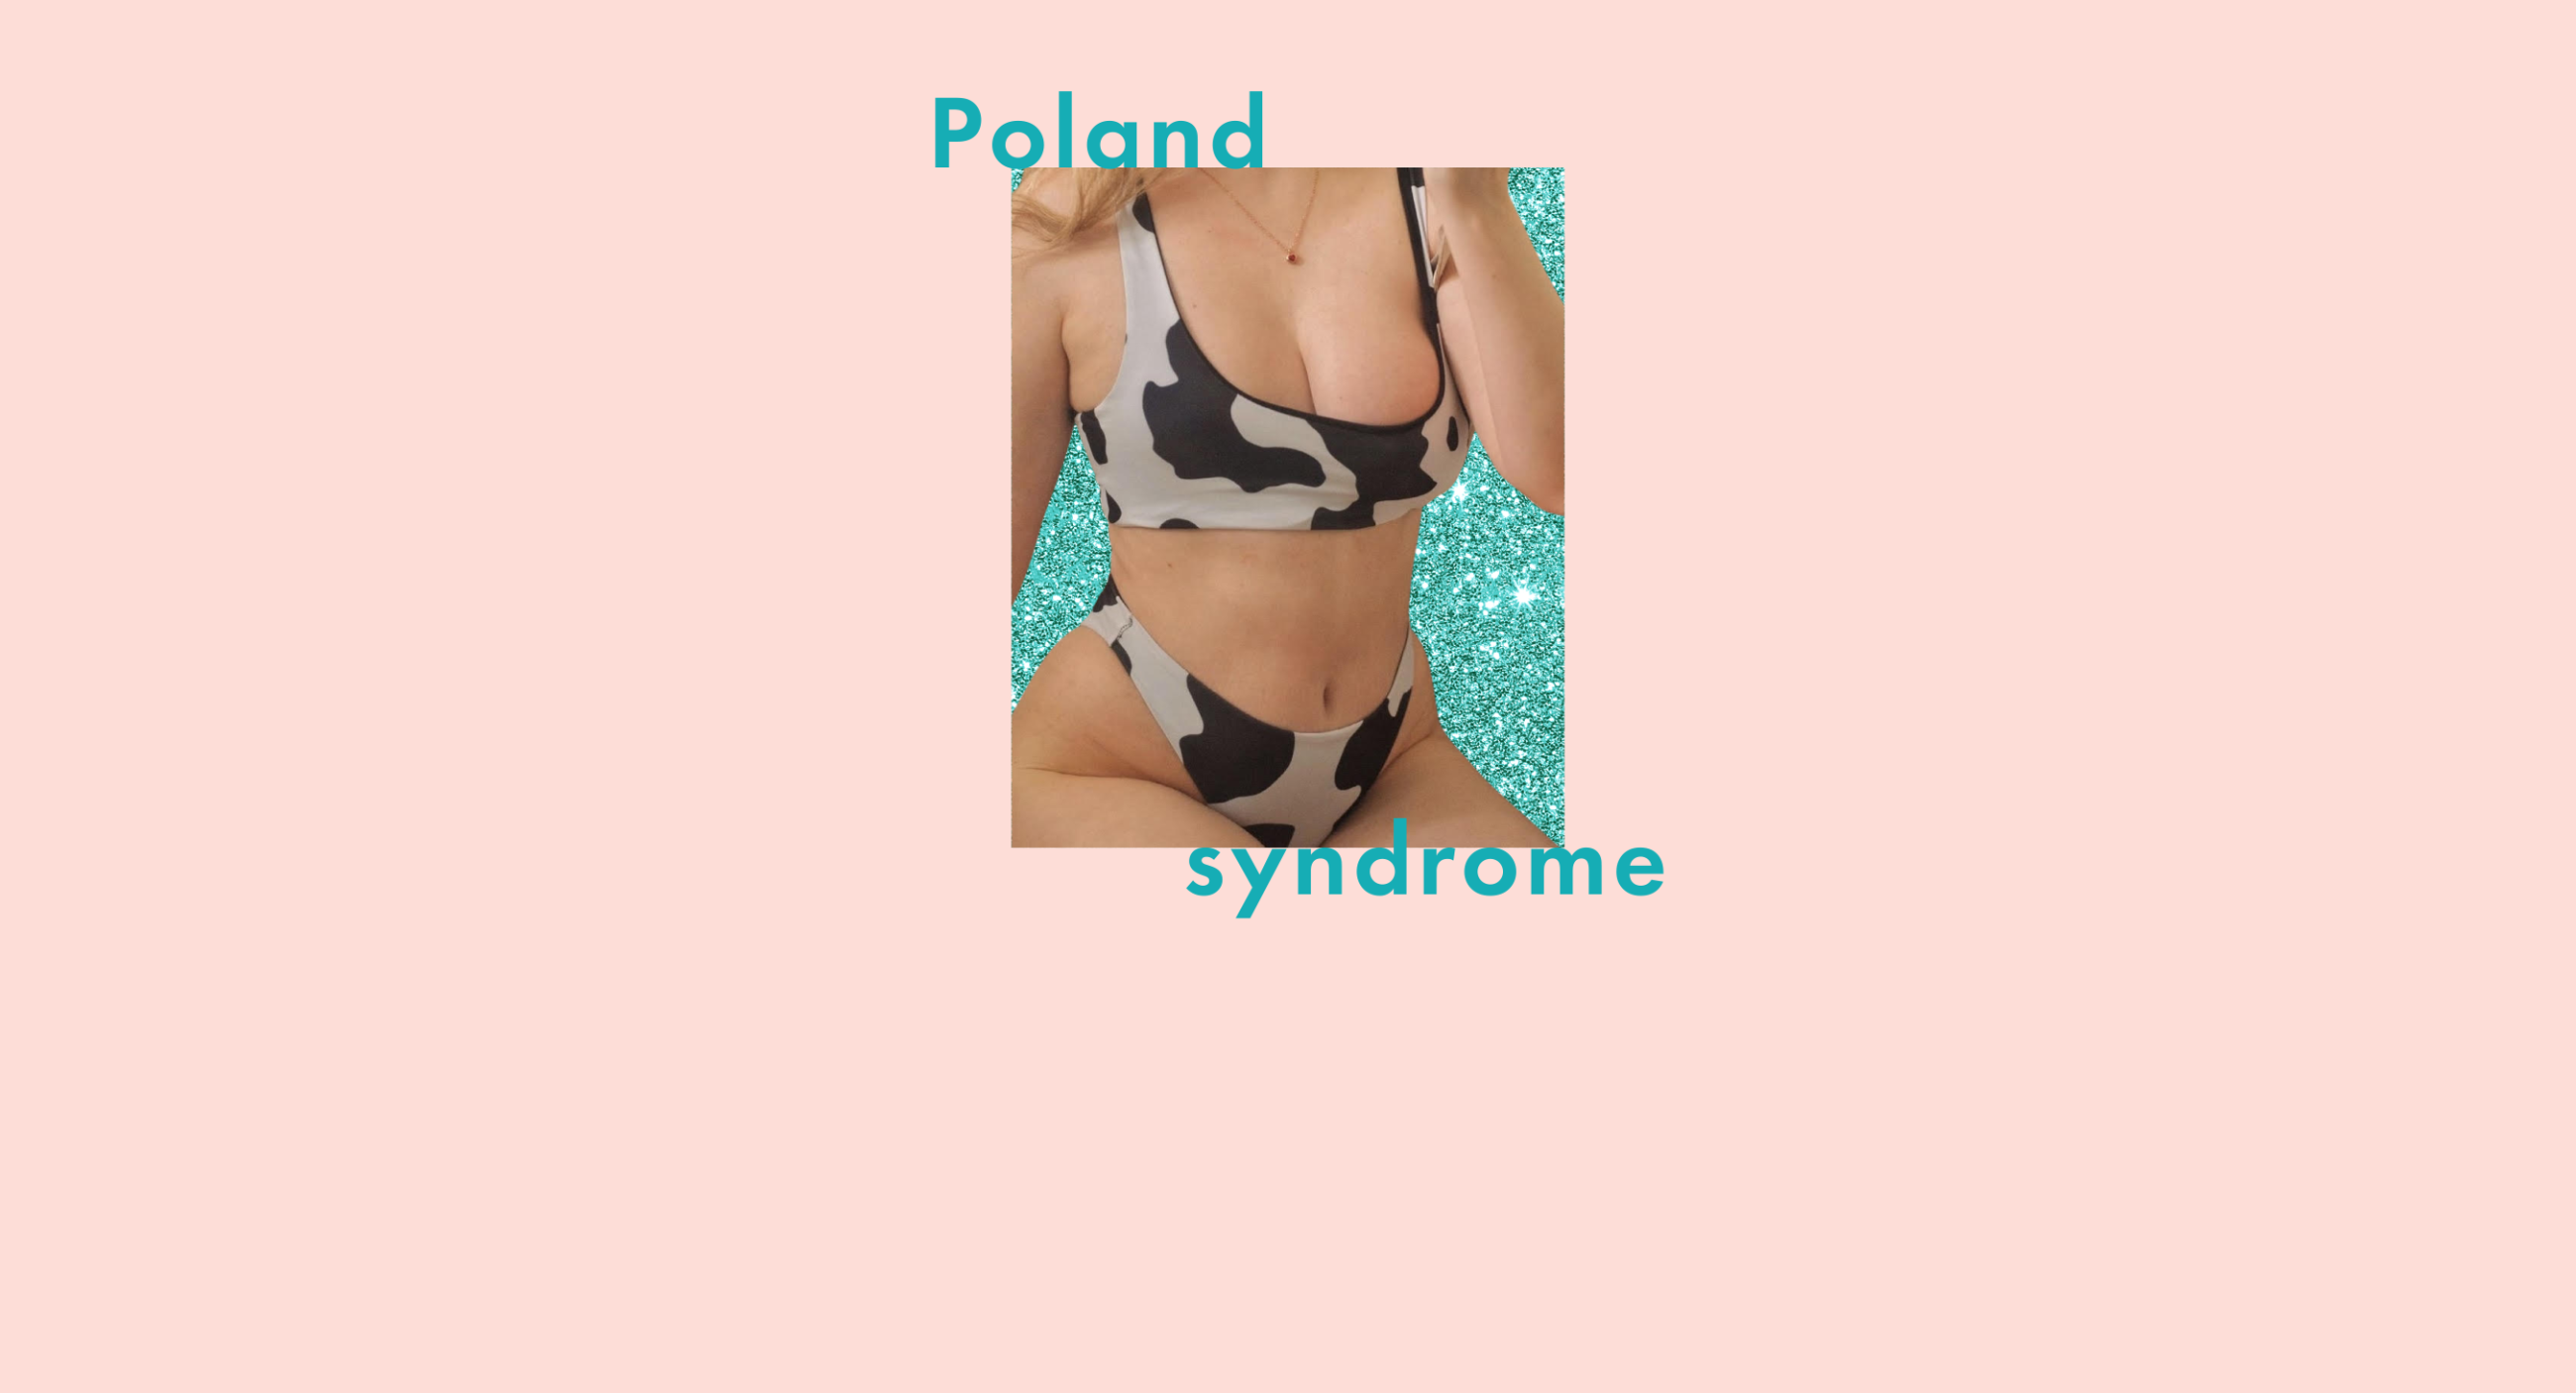 Poland Syndrome: What it's like to be a woman born with one boob